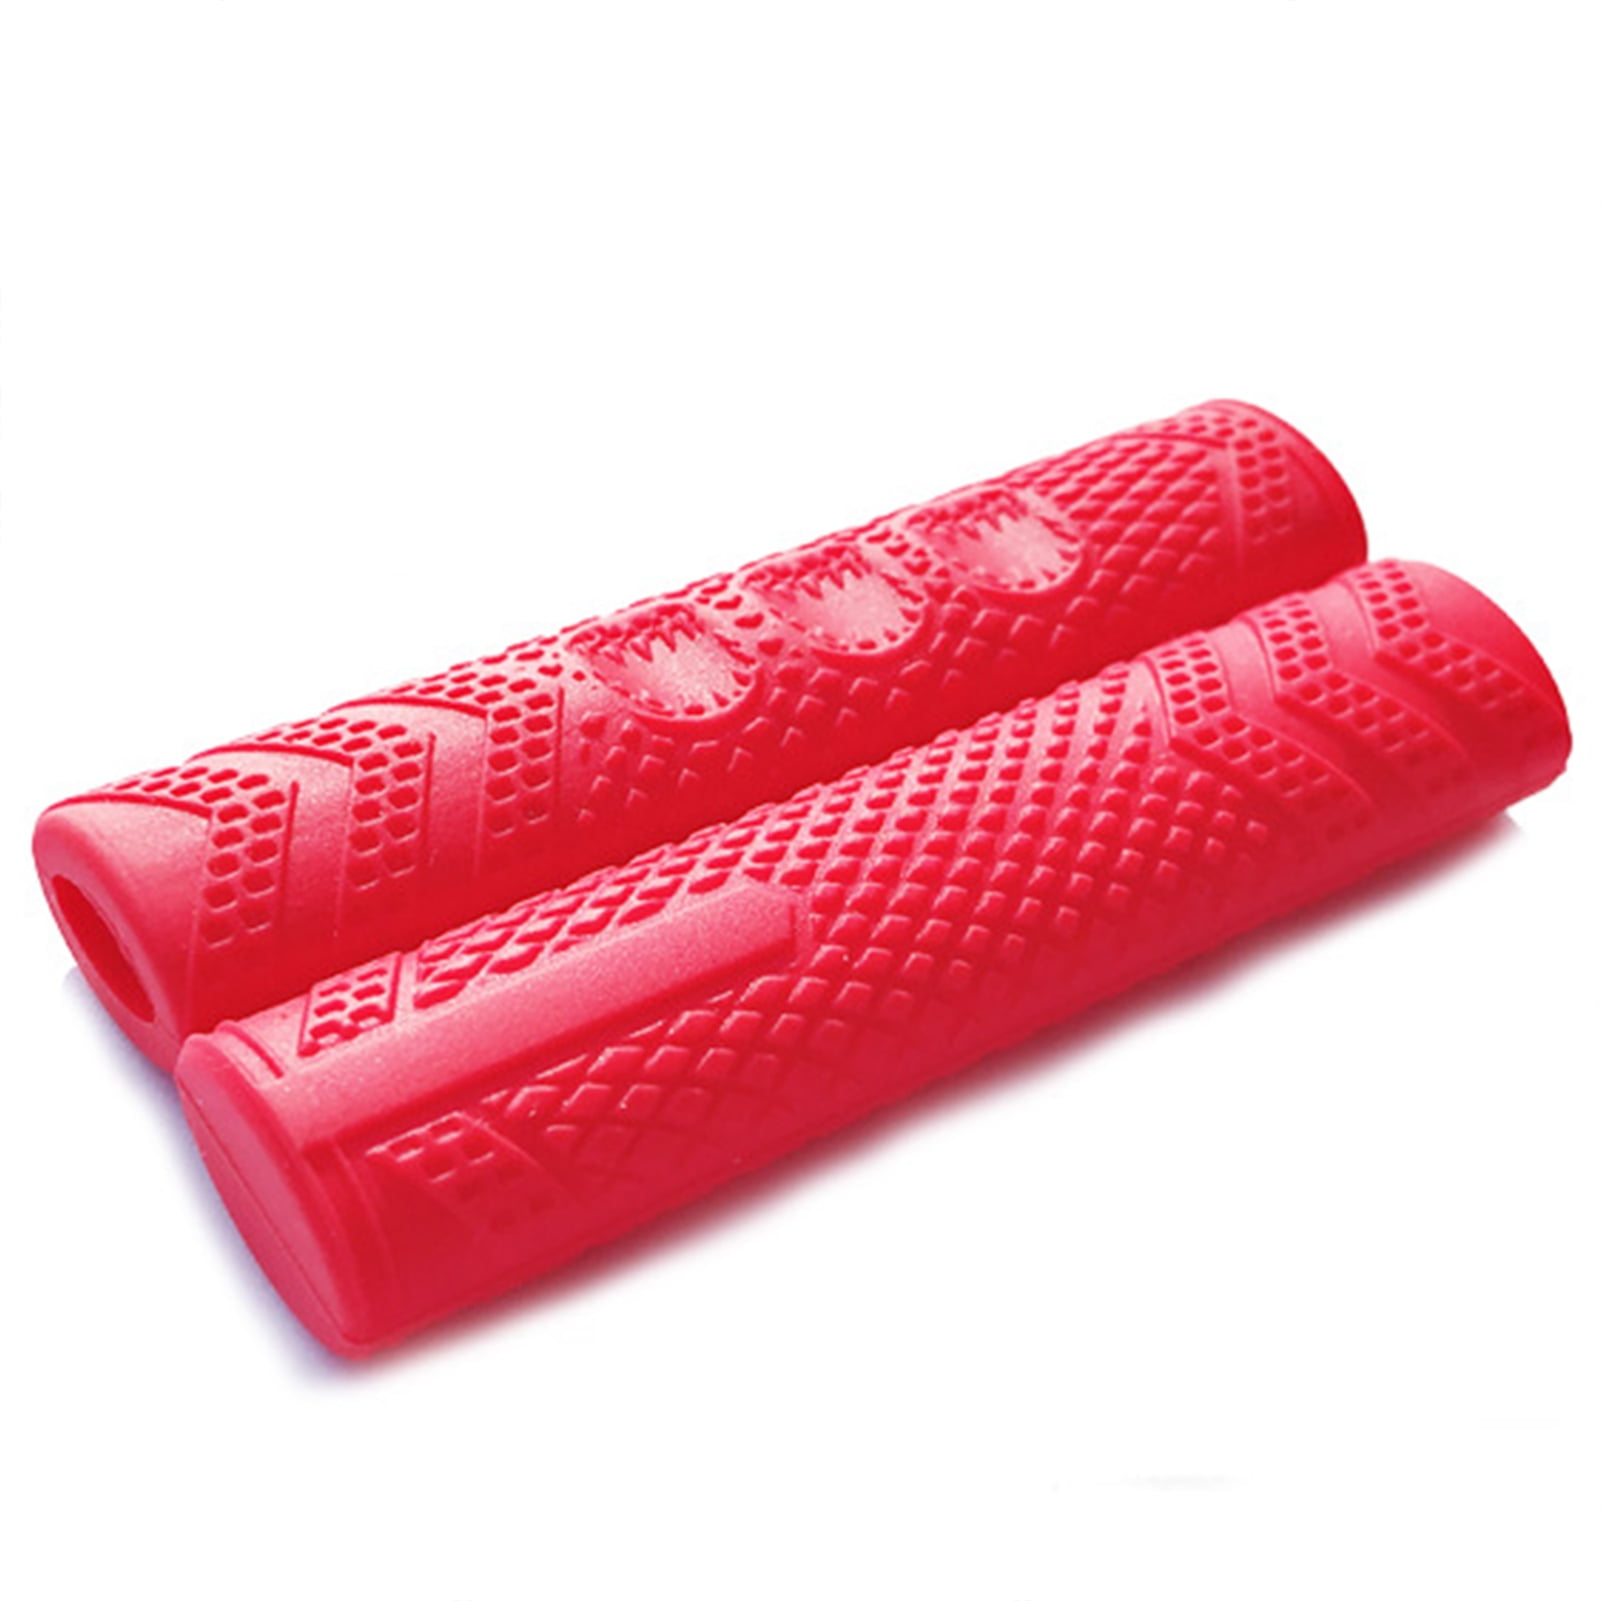 Details about   Universal Bike Hand Grip Handle Bar Grips MTB Road Mountain Bicycle Scooter. 